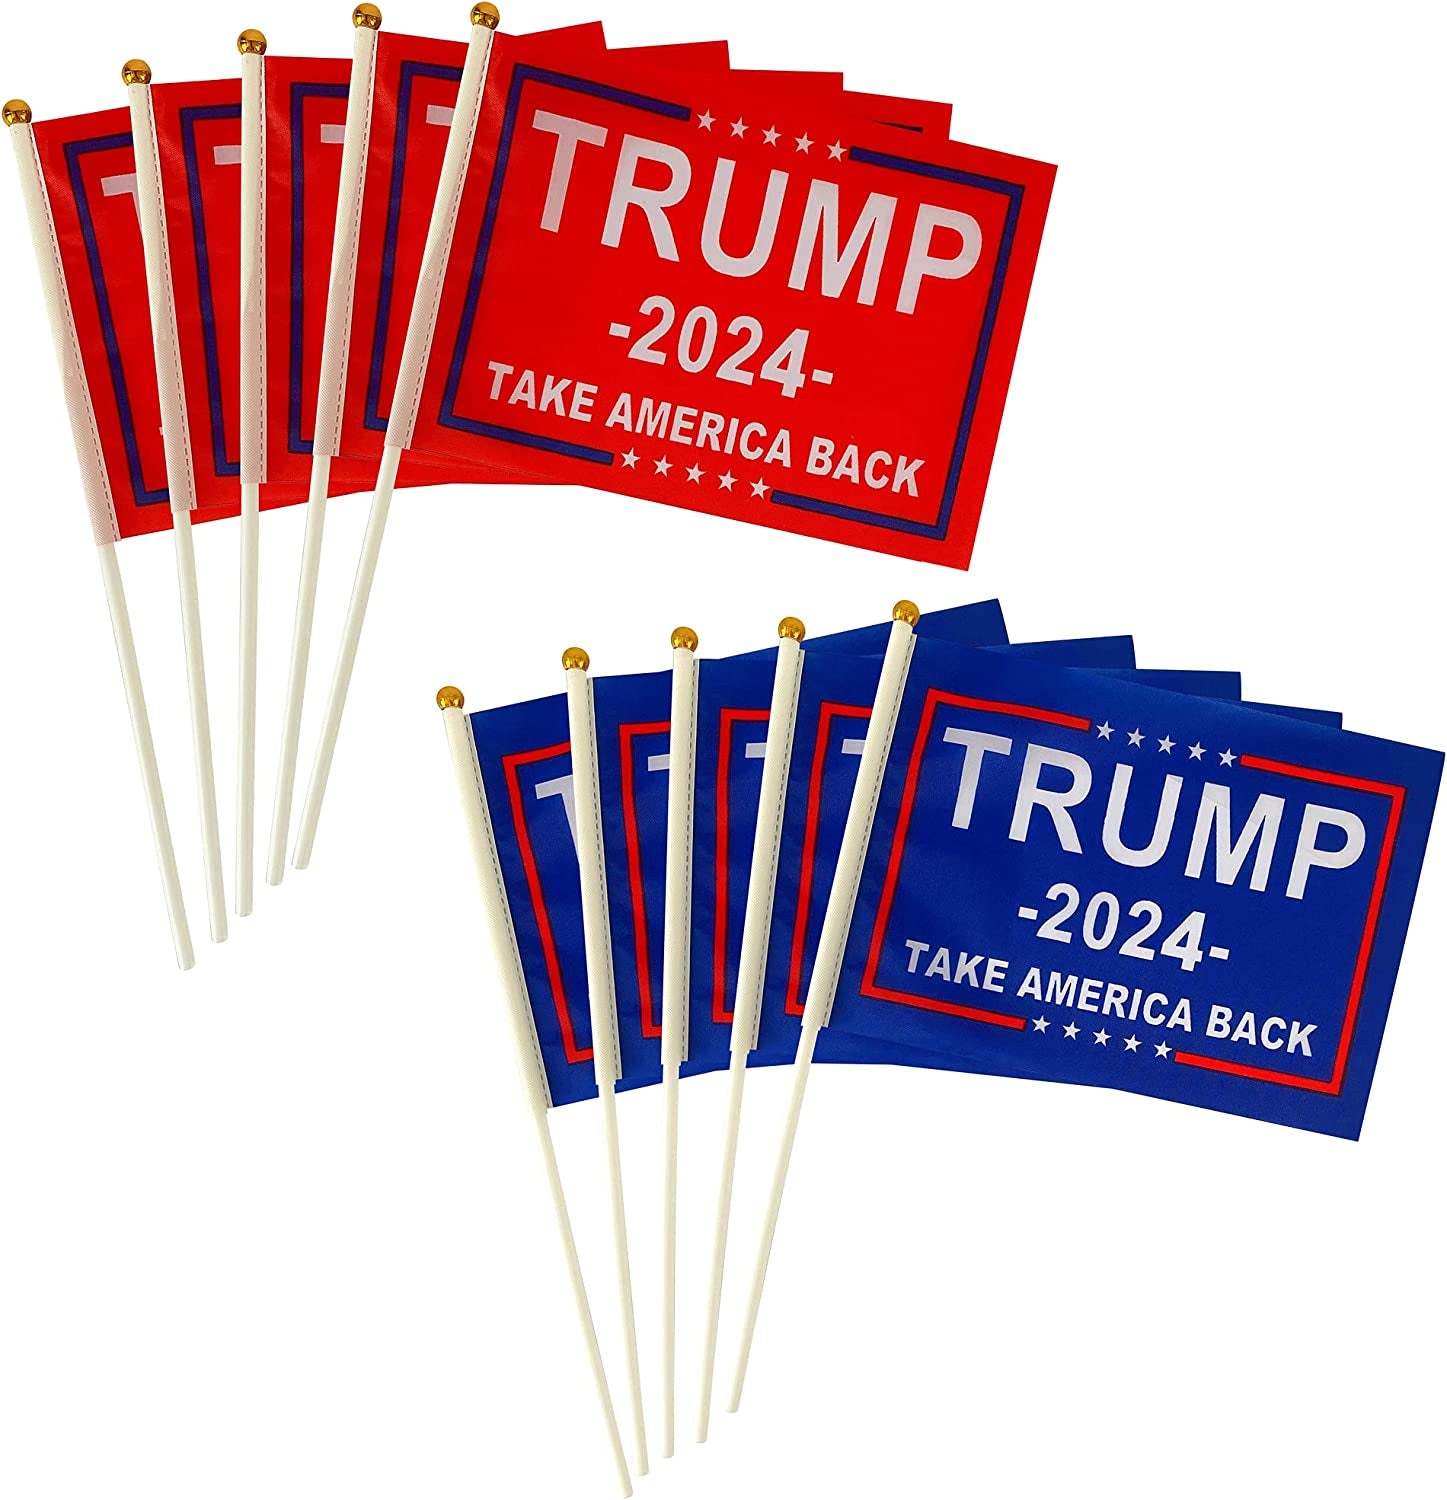 Trump 2024 Flag Take America Back Flags Small Mini Stick Flags Banner Decorations,Red and Blue (24 Pack)